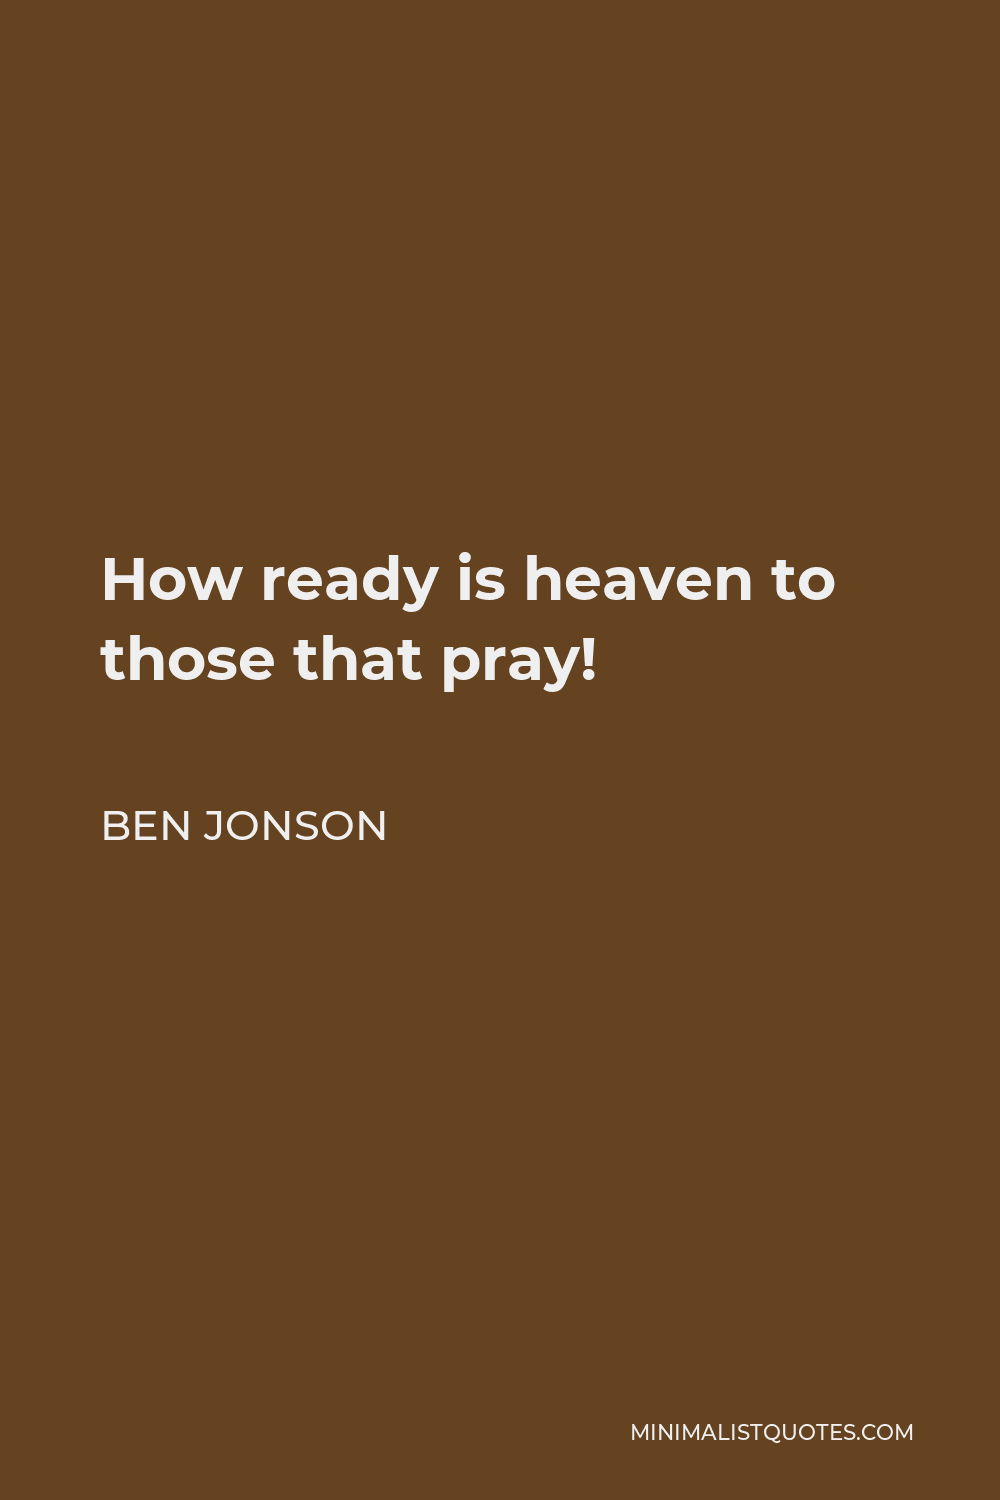 Ben Jonson Quote - How ready is heaven to those that pray!